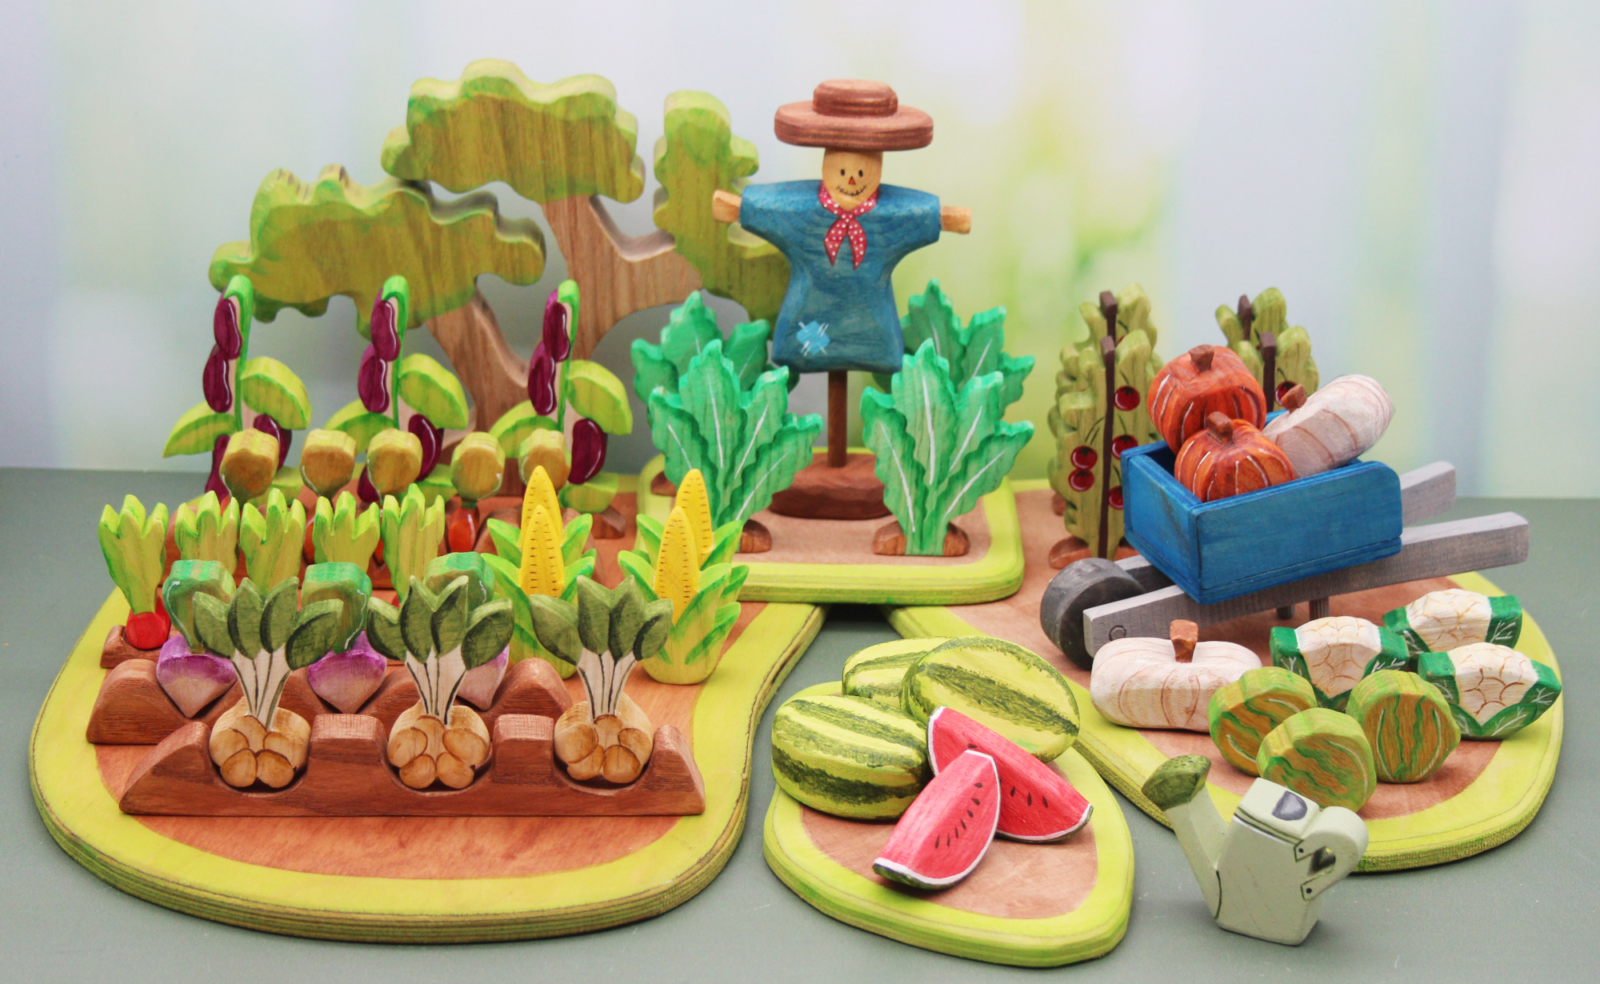 Good Shepherd Toys - Front page - New Vegetable set